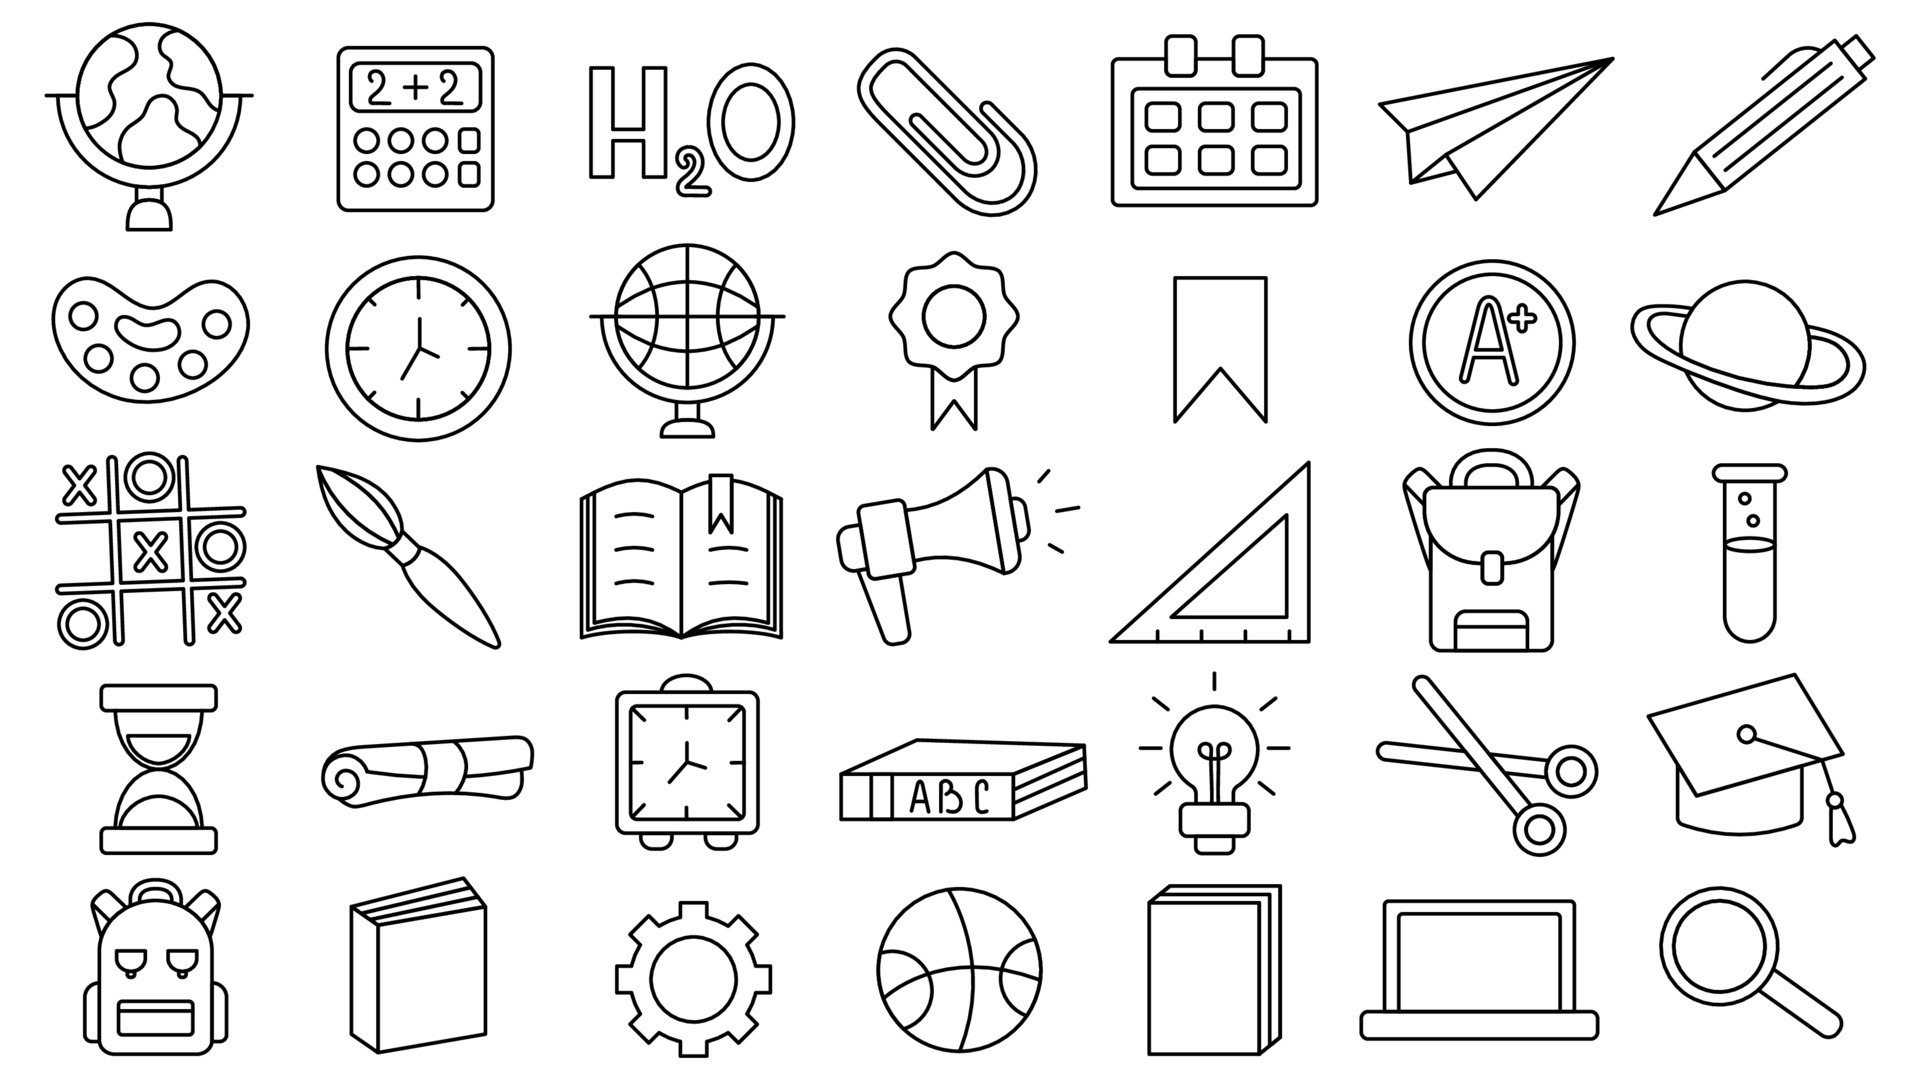 Set of school items object supplies and accessor Vector Image